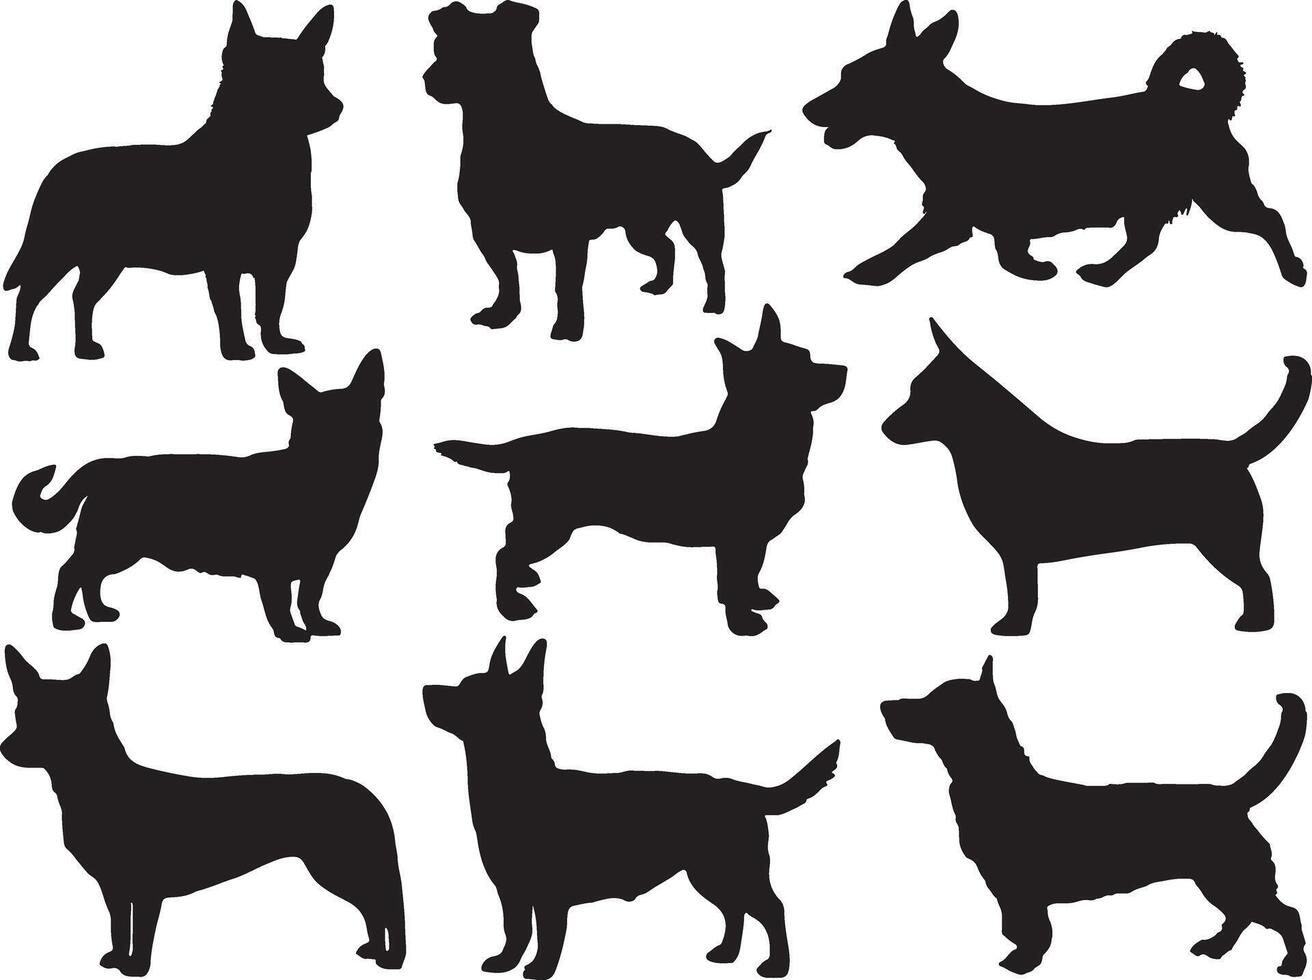 Lancashire heeler dogs silhouette on white background vector